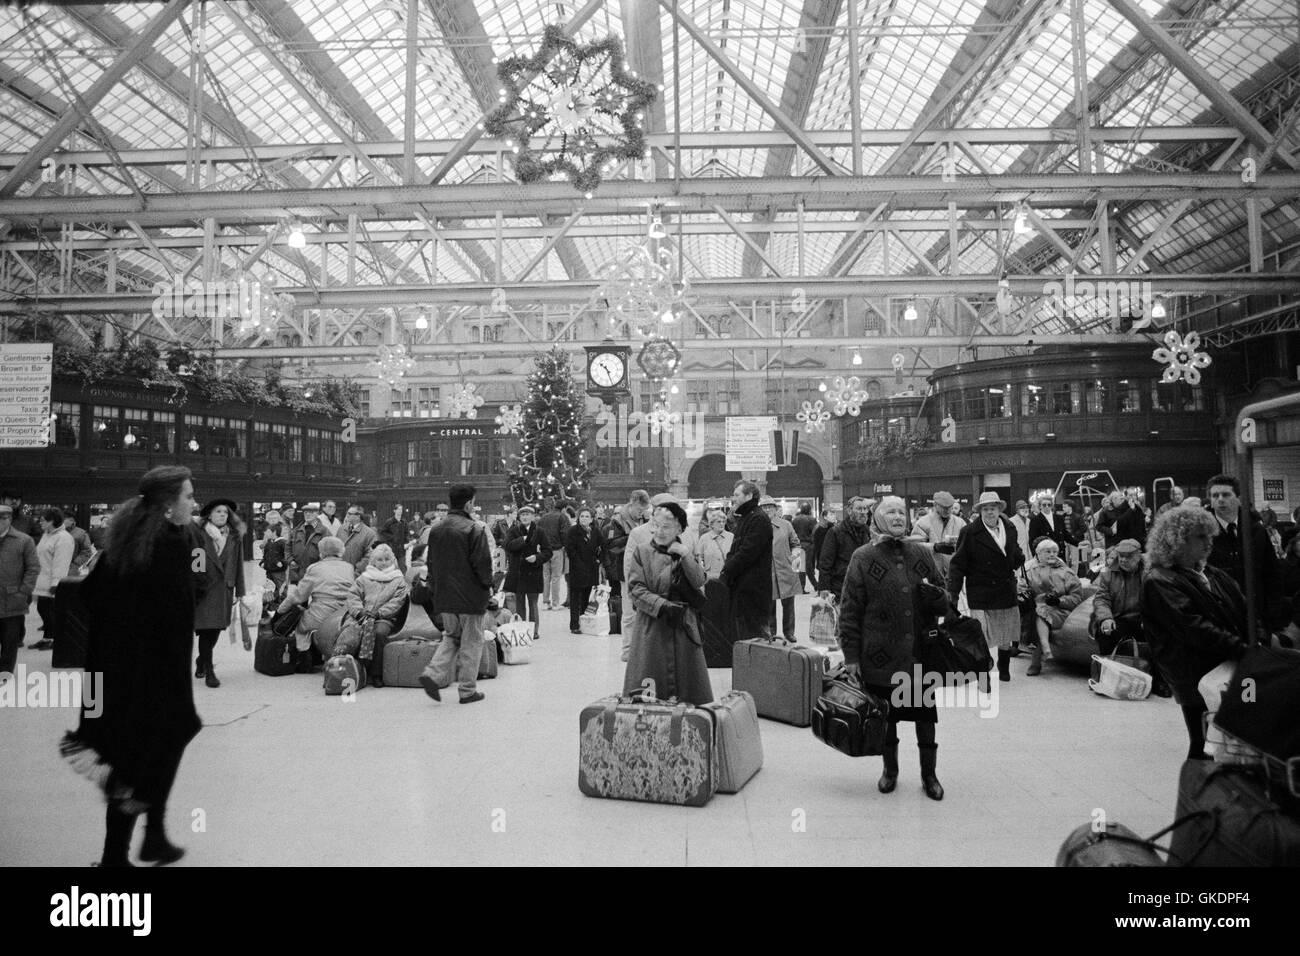 Passengers waiting at Central Station Glasgow, 1992 Stock Photo